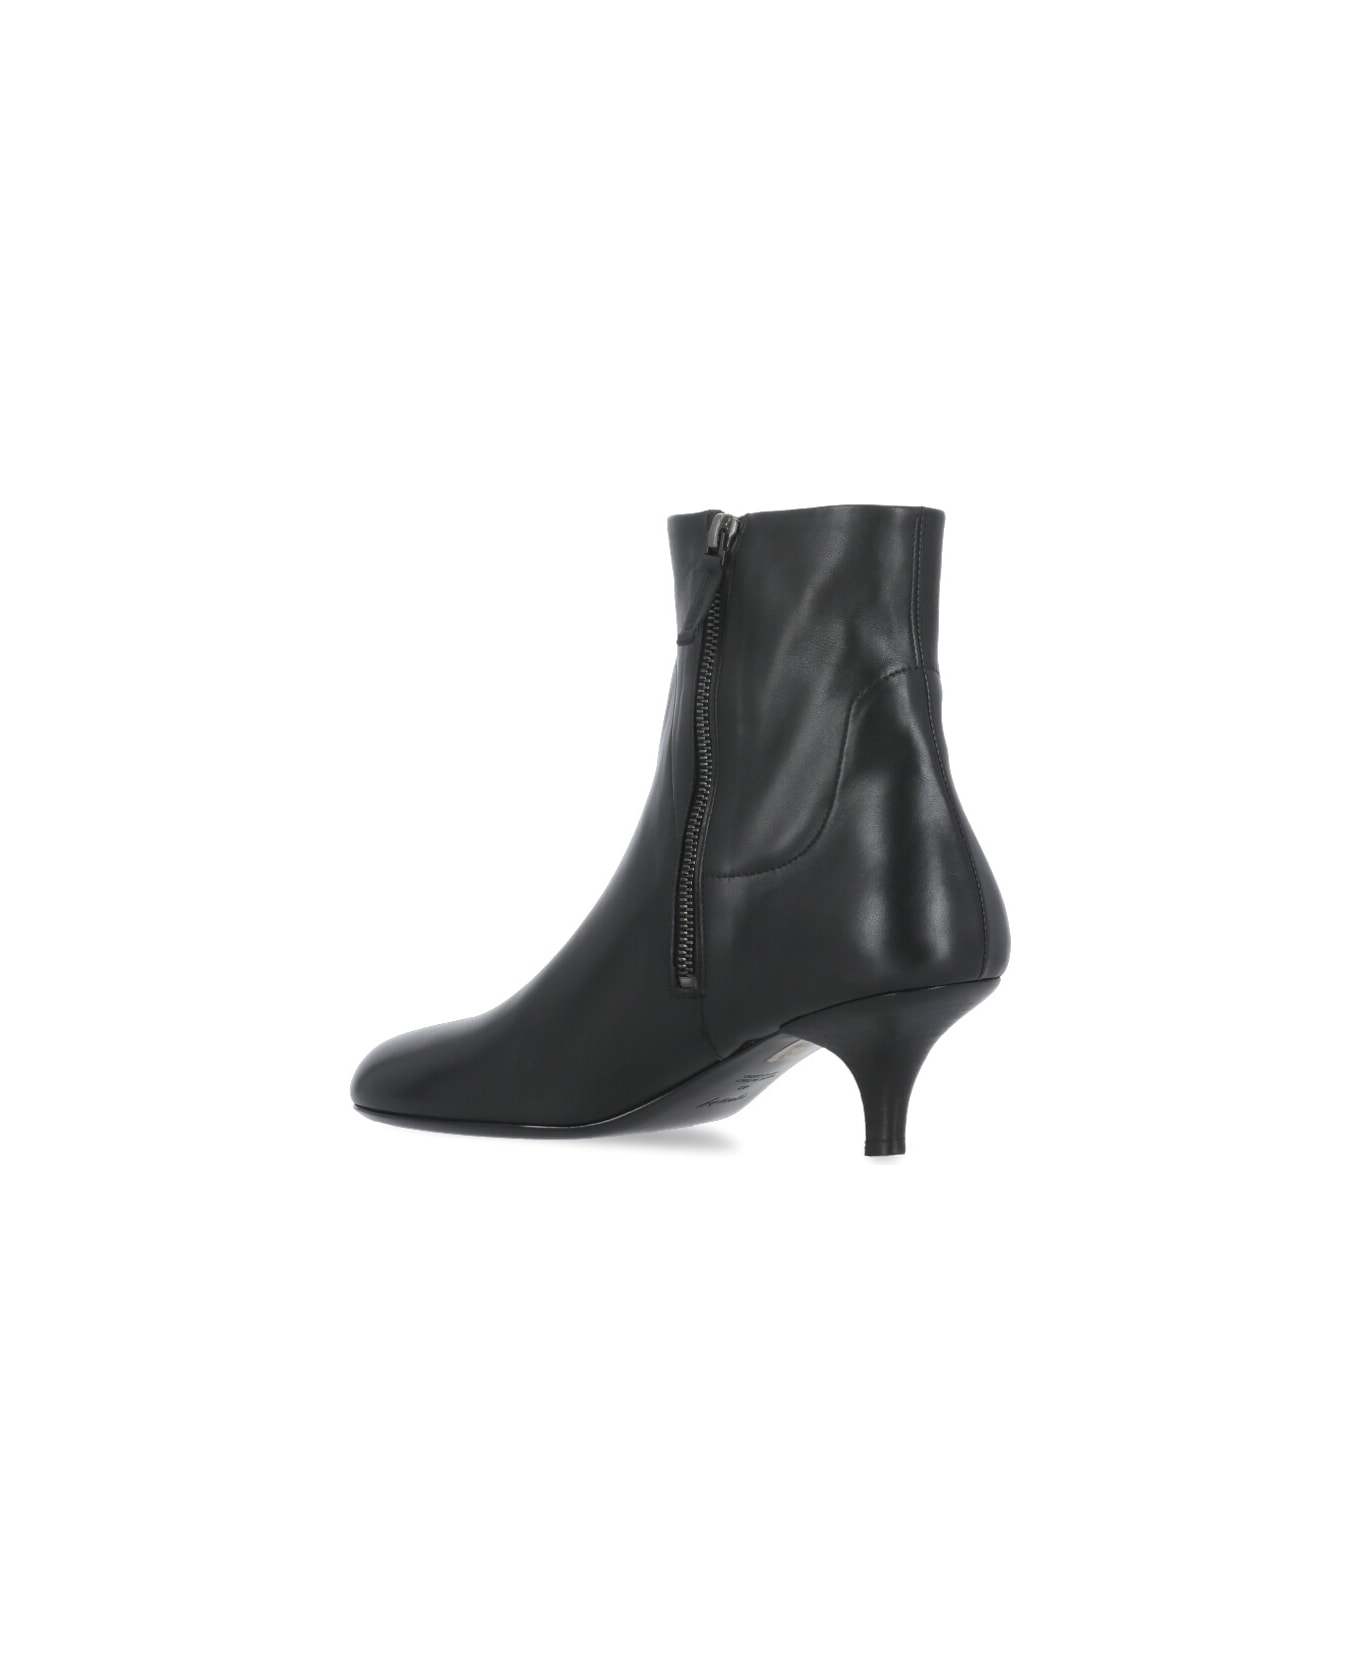 Marsell Spilla Ankle Boots - Black